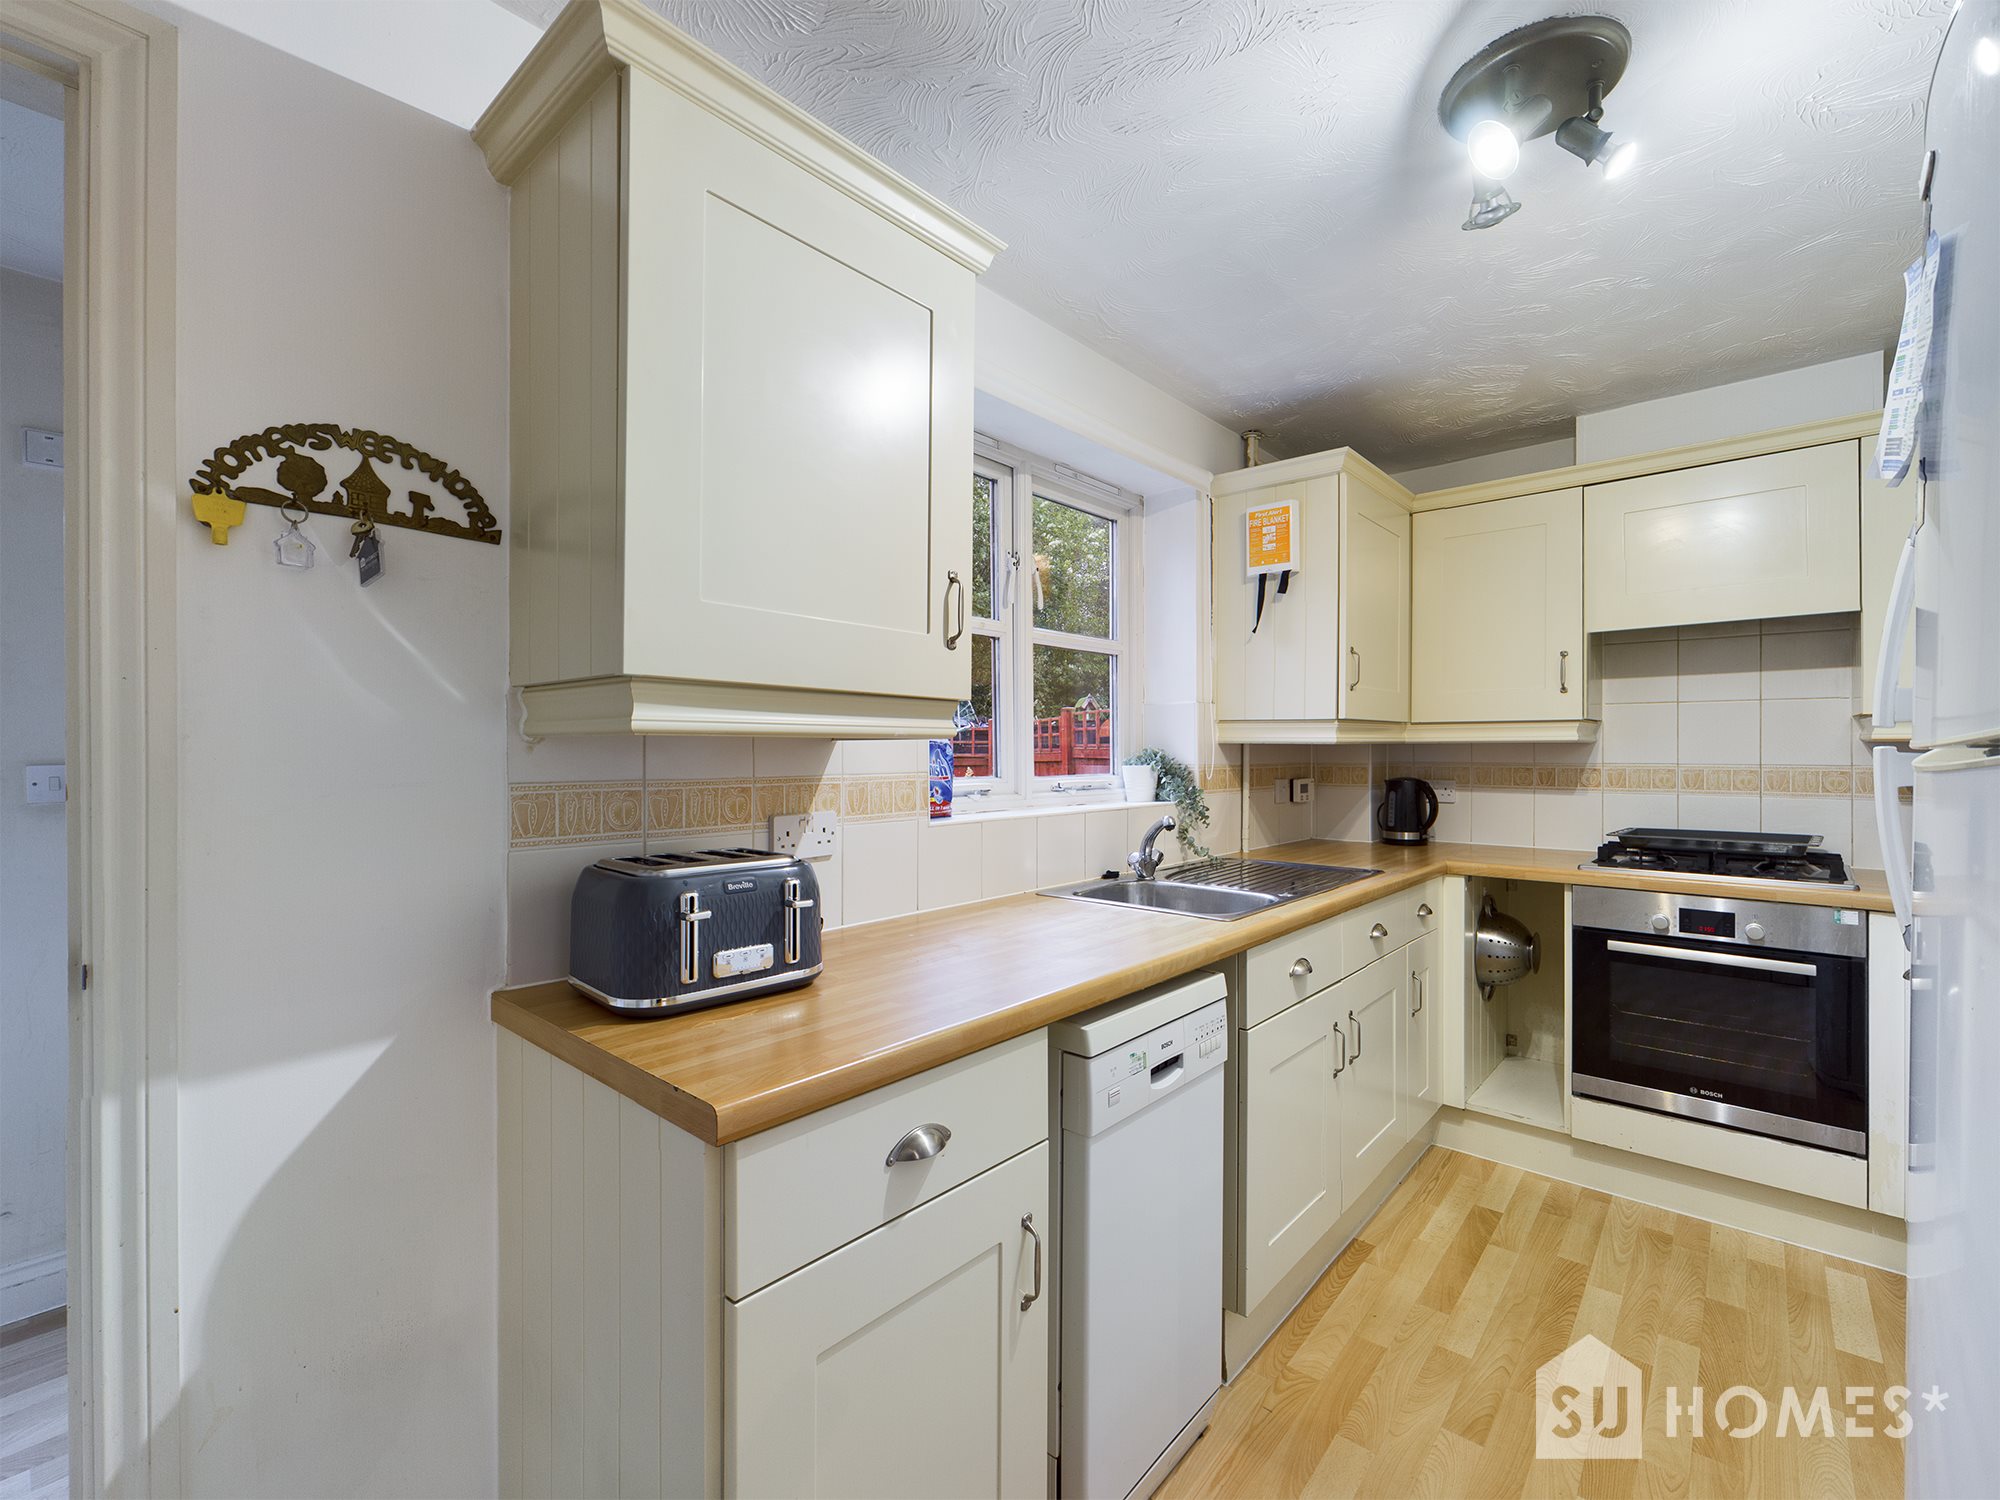 6 bed house to rent in Hesper Road, Colchester  - Property Image 4